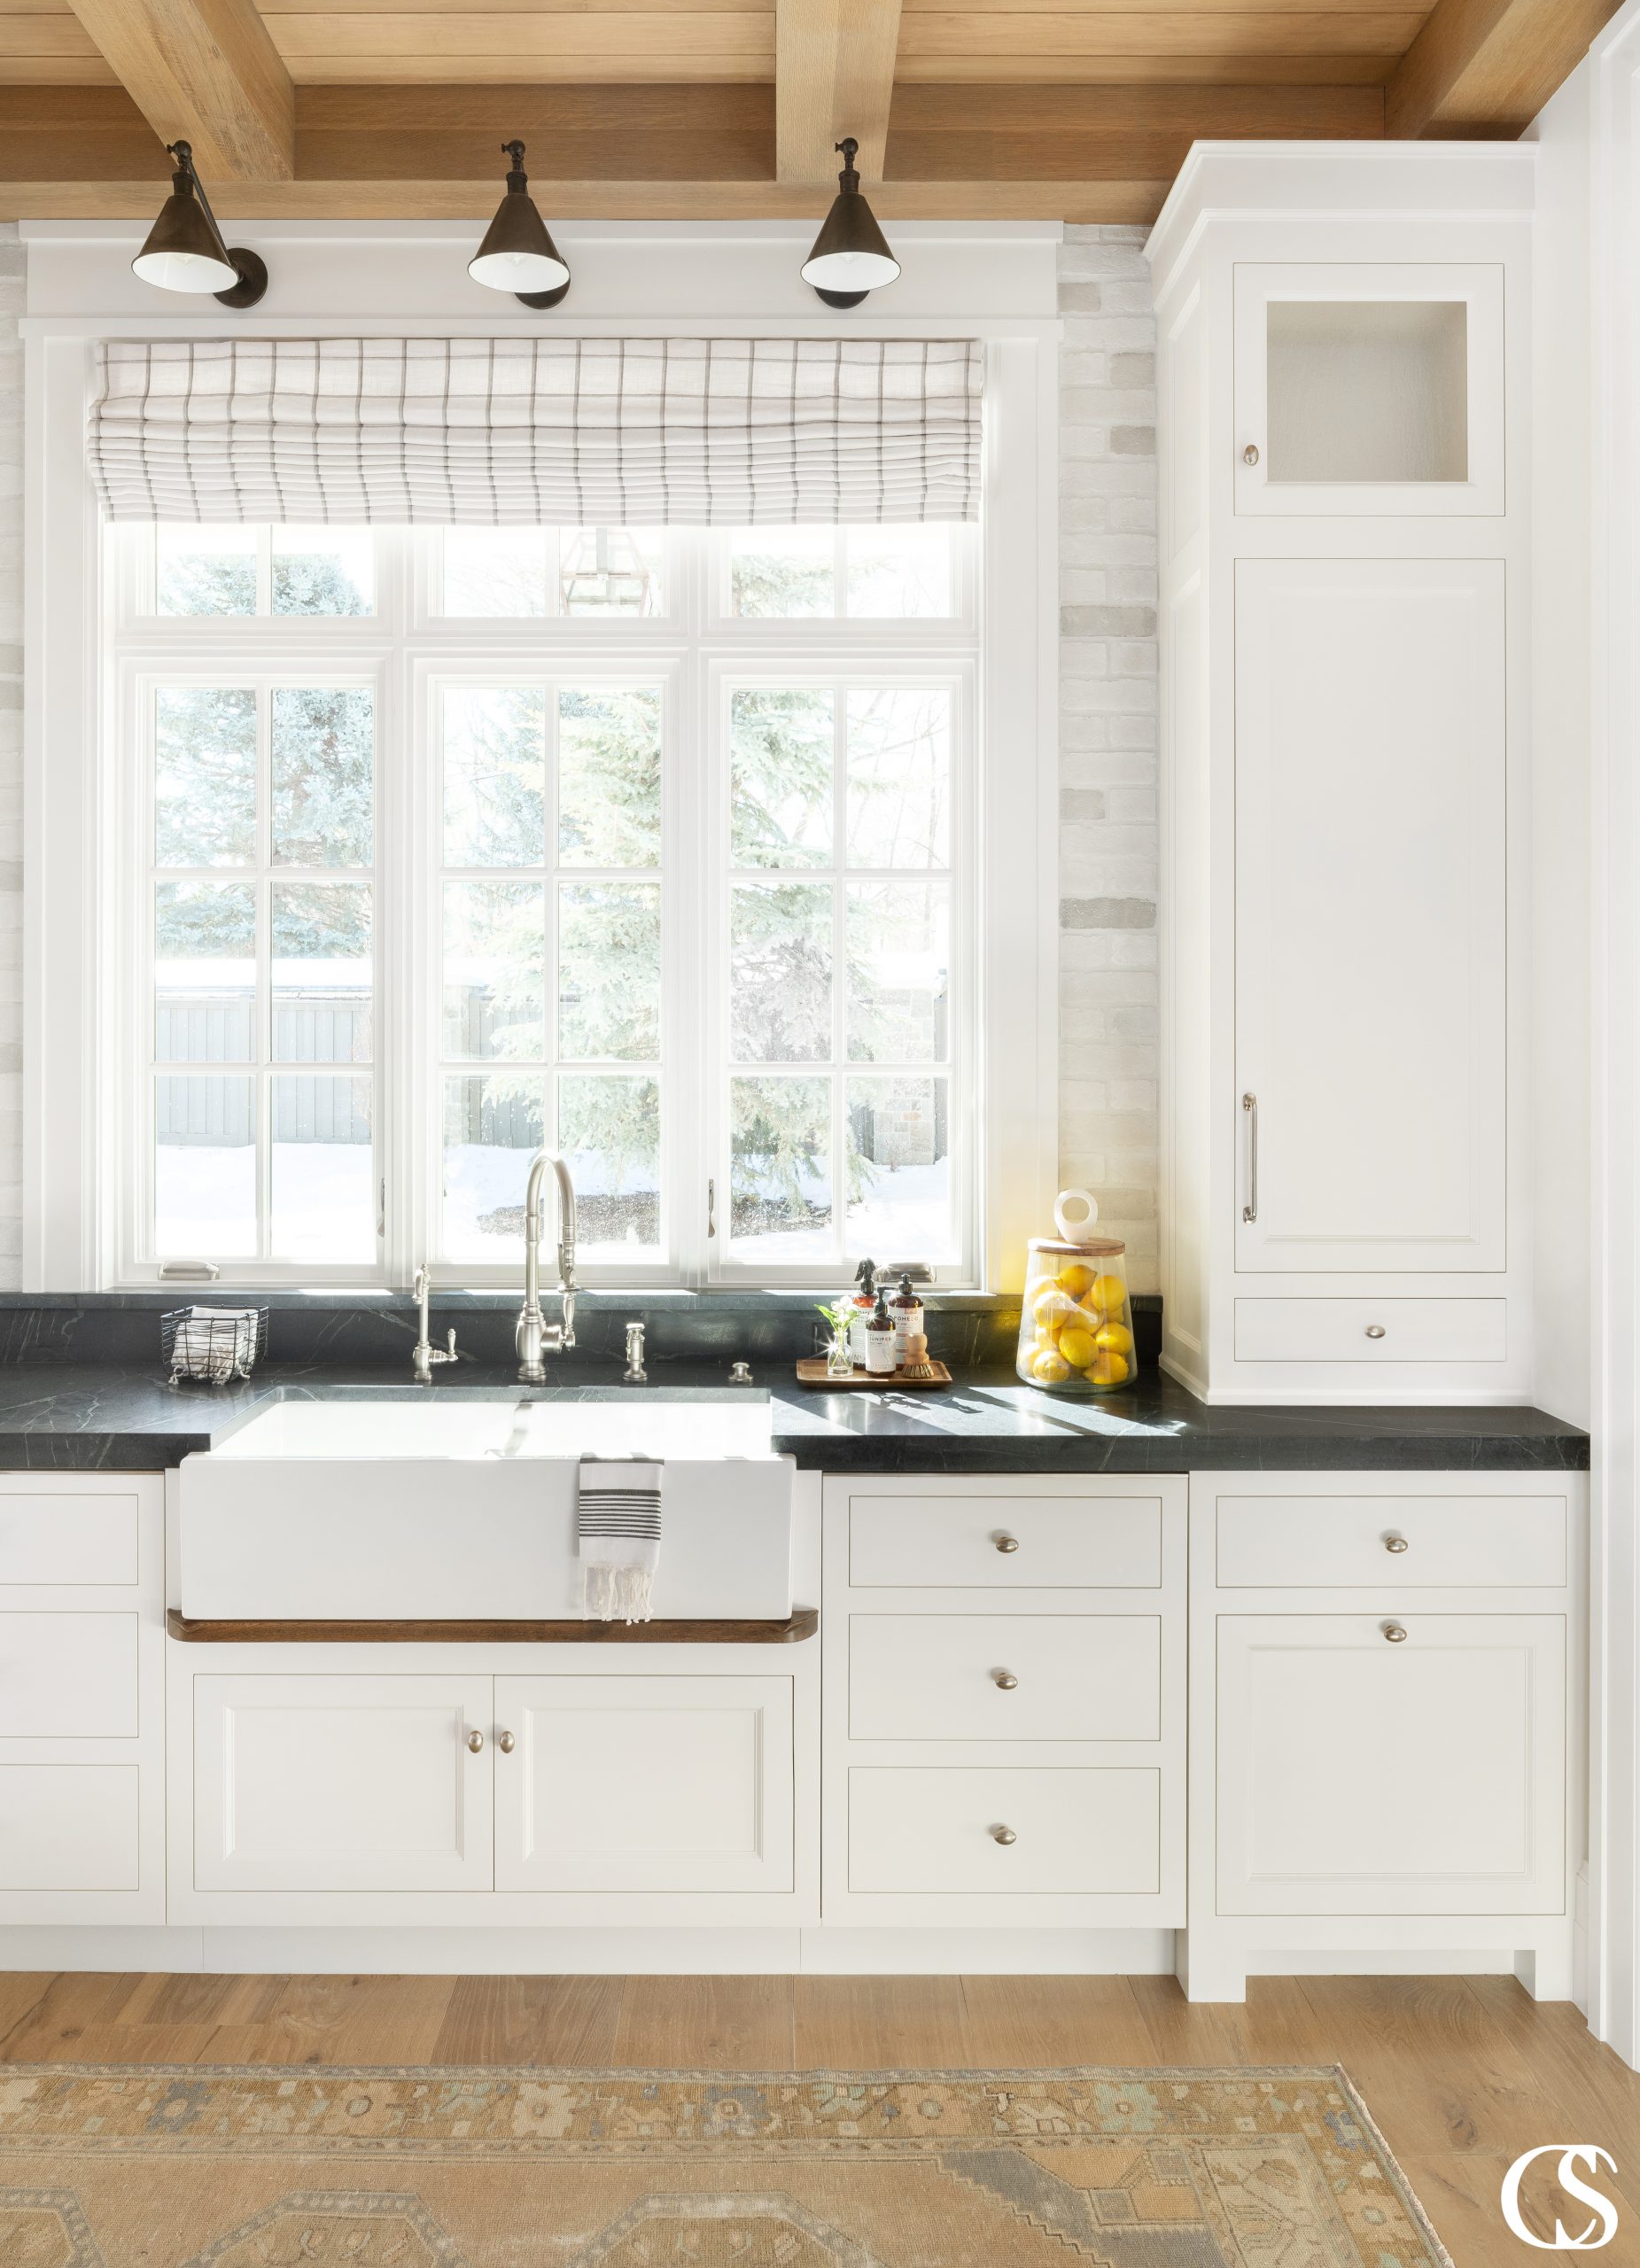 Love how this big kitchen window sheds plenty of light on the custom kitchen cabinet design. And with the addition of the beautiful installed lighting, these inset cabinets will be on display no matter the time of day.